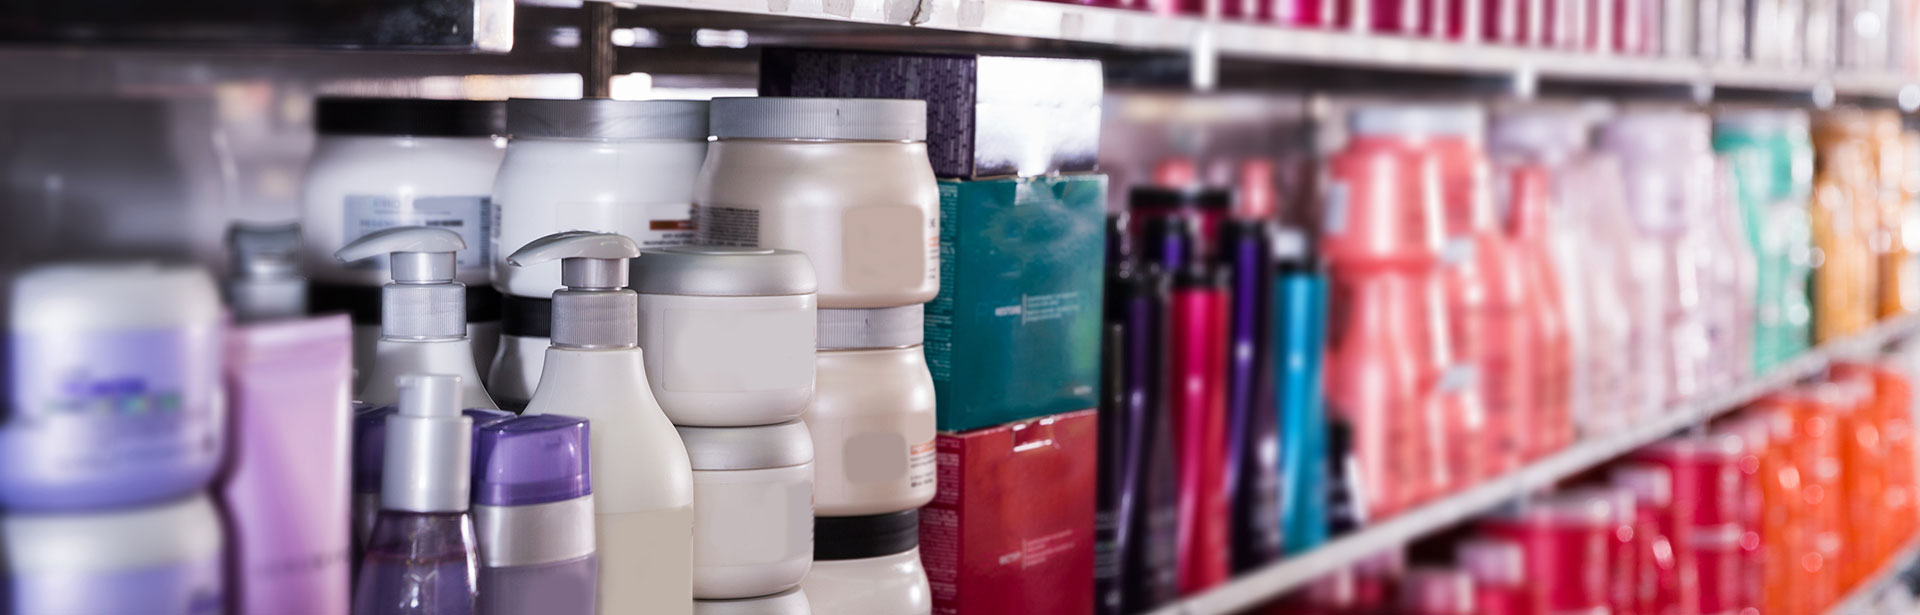 Close-up of a shelf of cosmetic products